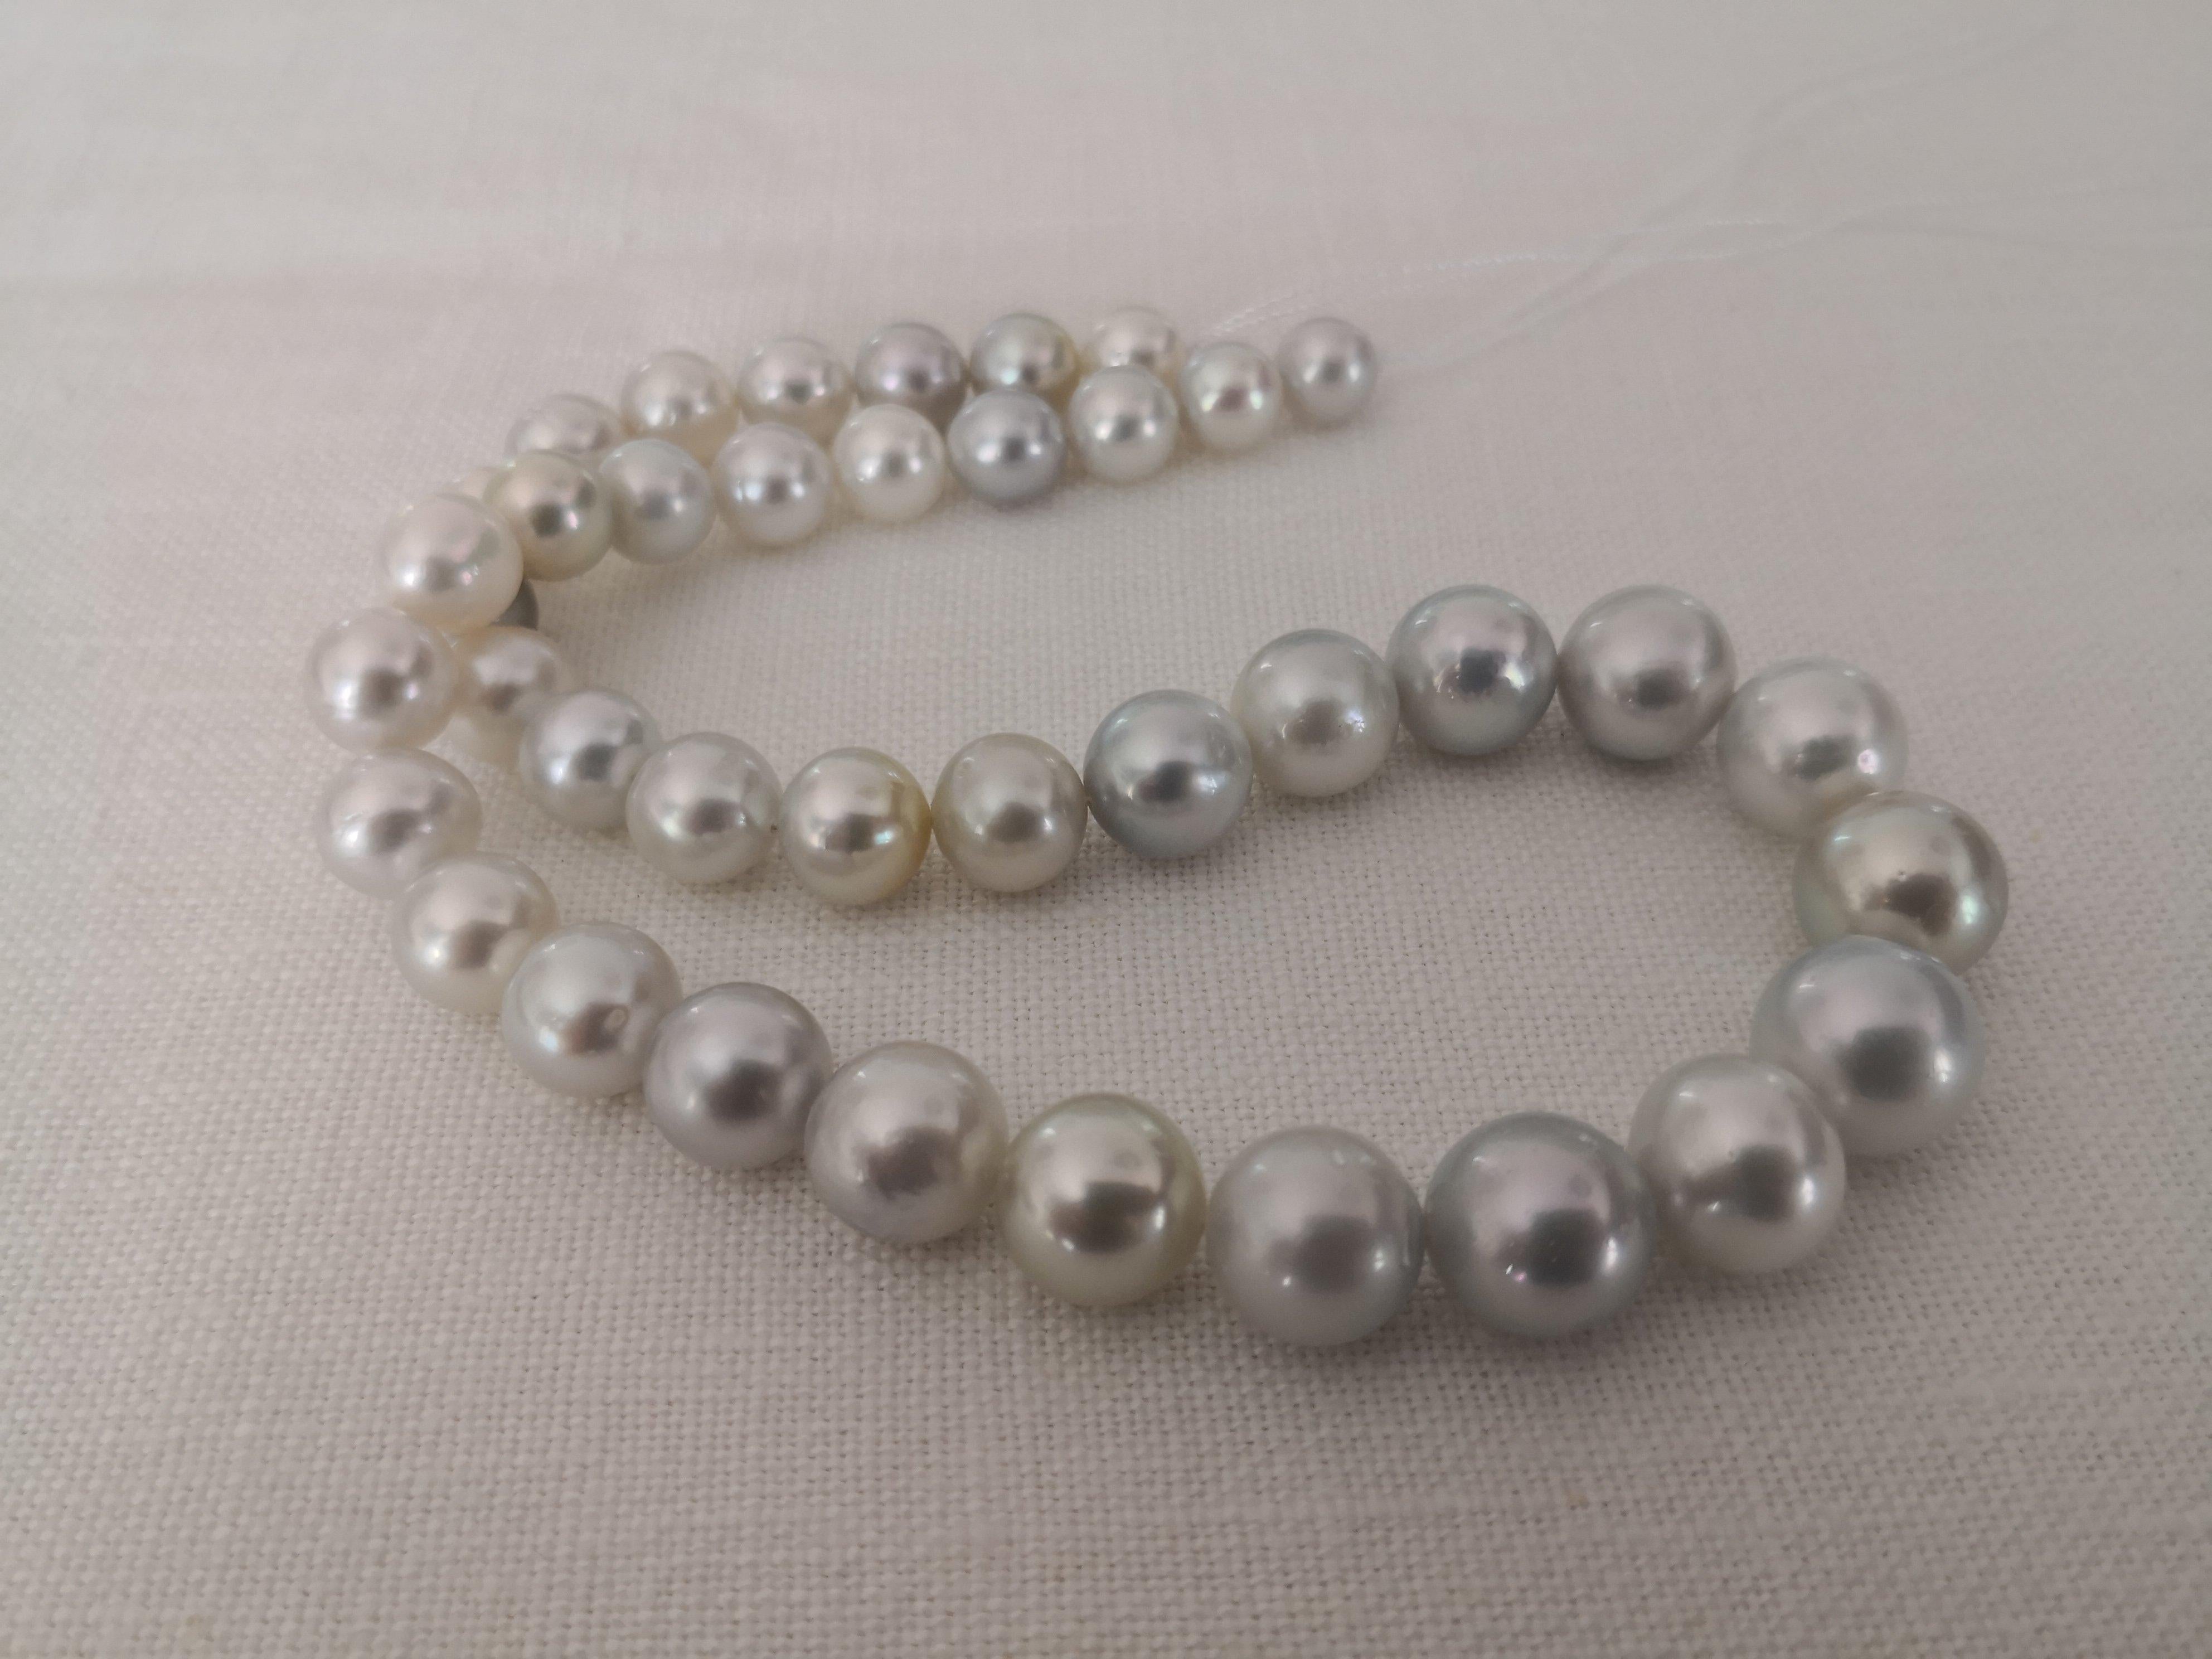 Women's Elegante Silver Natural Color South Sea Pearls with High Luster and Orient